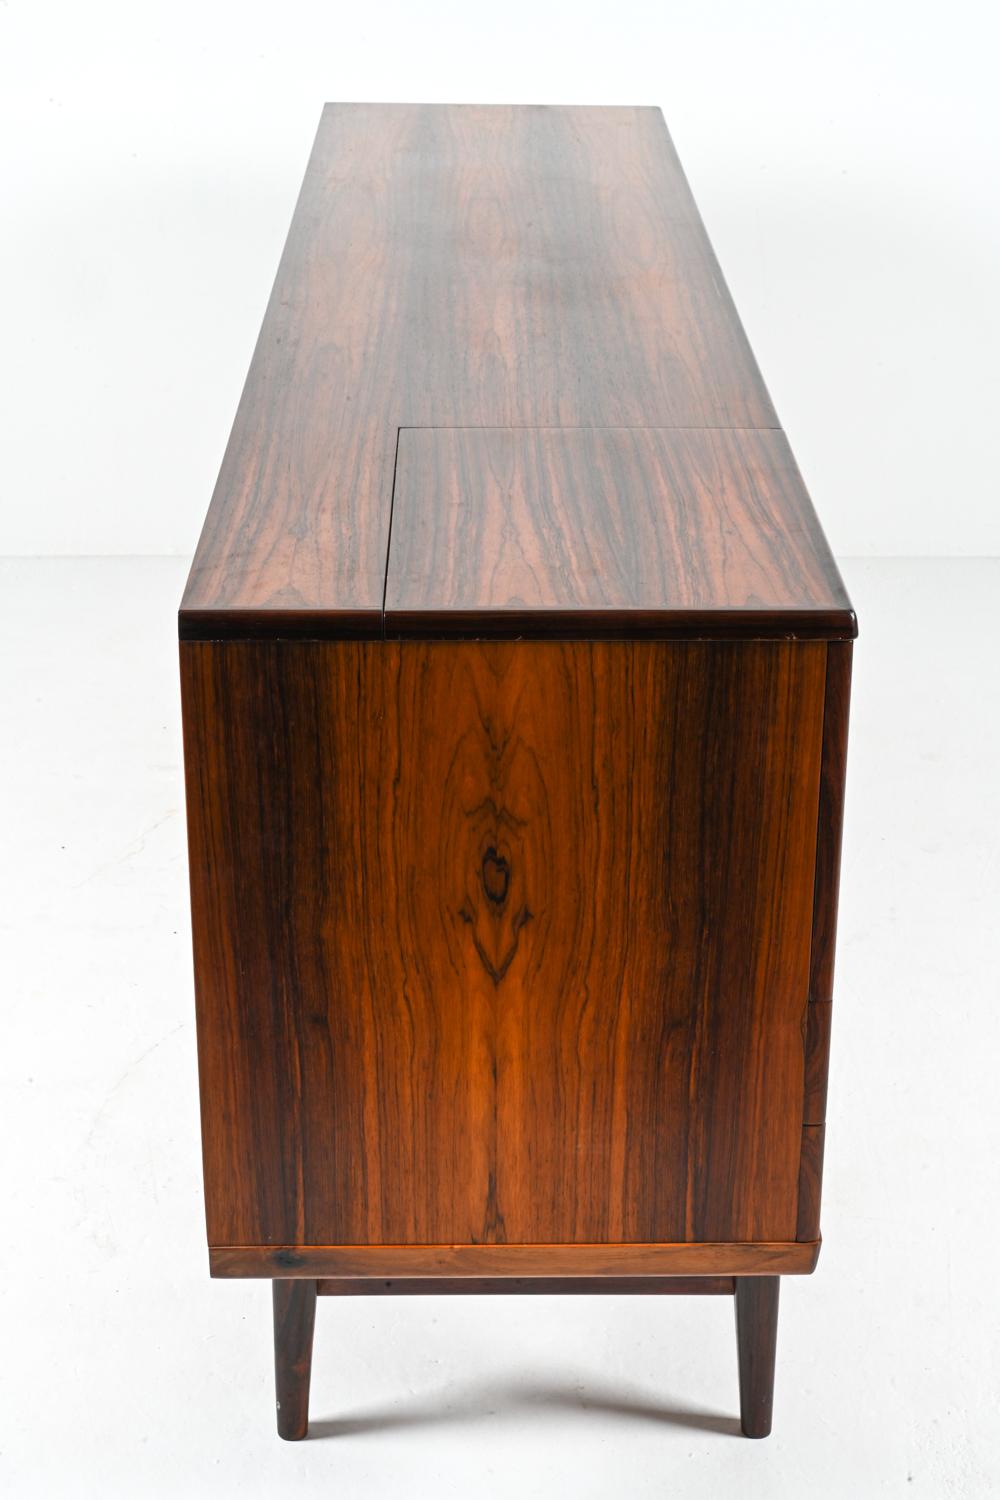 Rare Rosewood Sideboard With Bar by Johannes Andersen; Denmark, c. 1960's For Sale 10